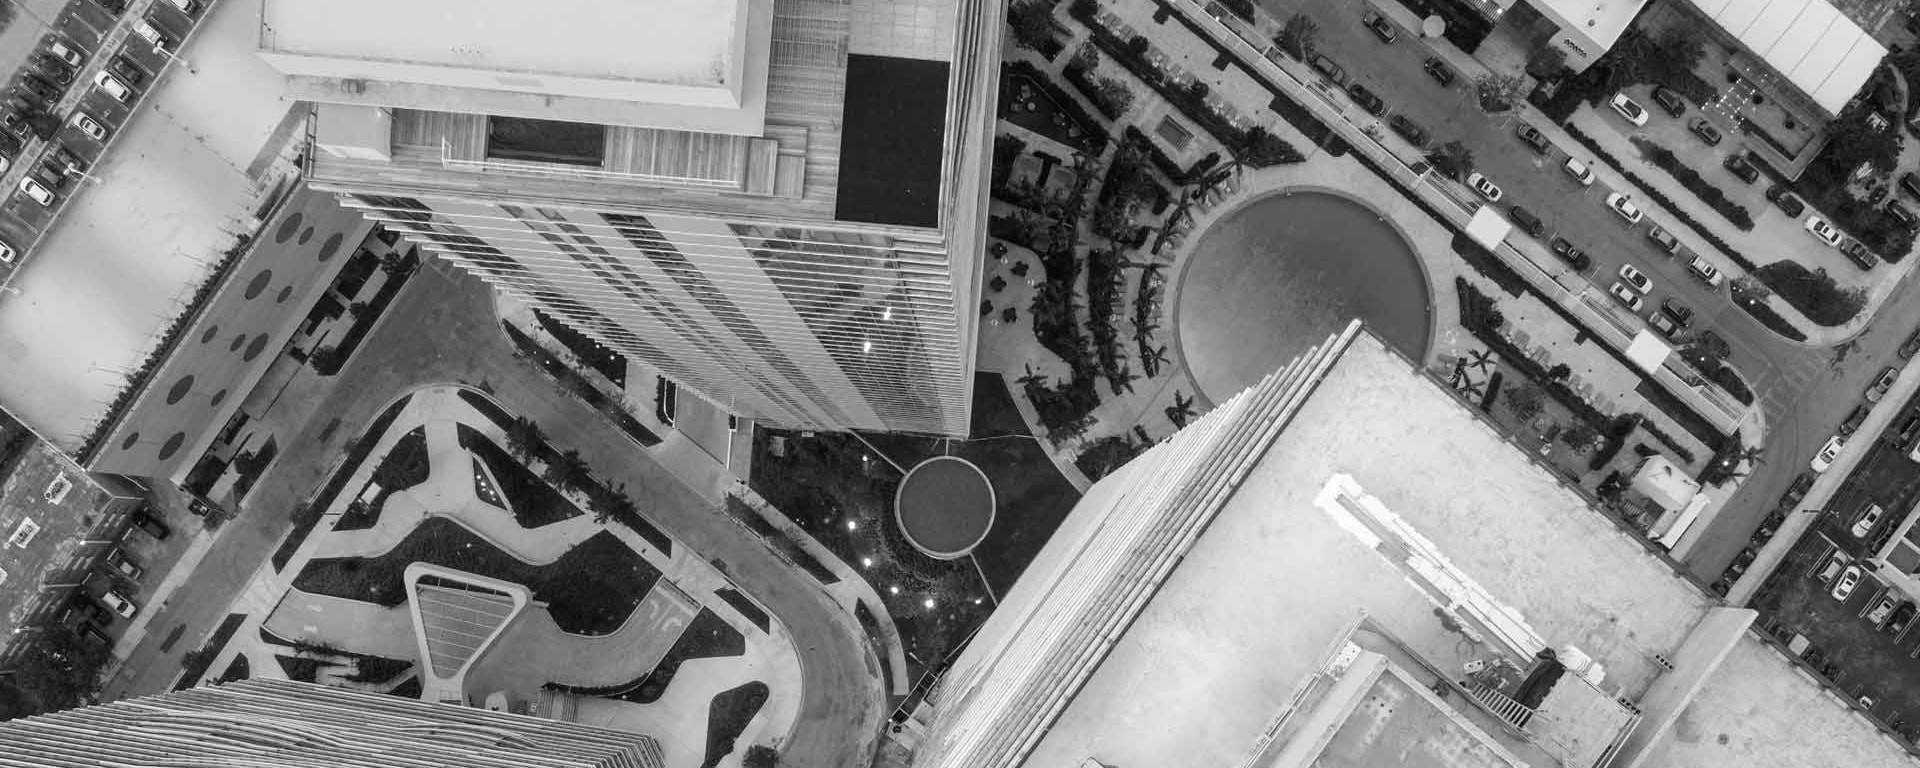 A black and white picture of a skyscraper from a bird's-eye view.